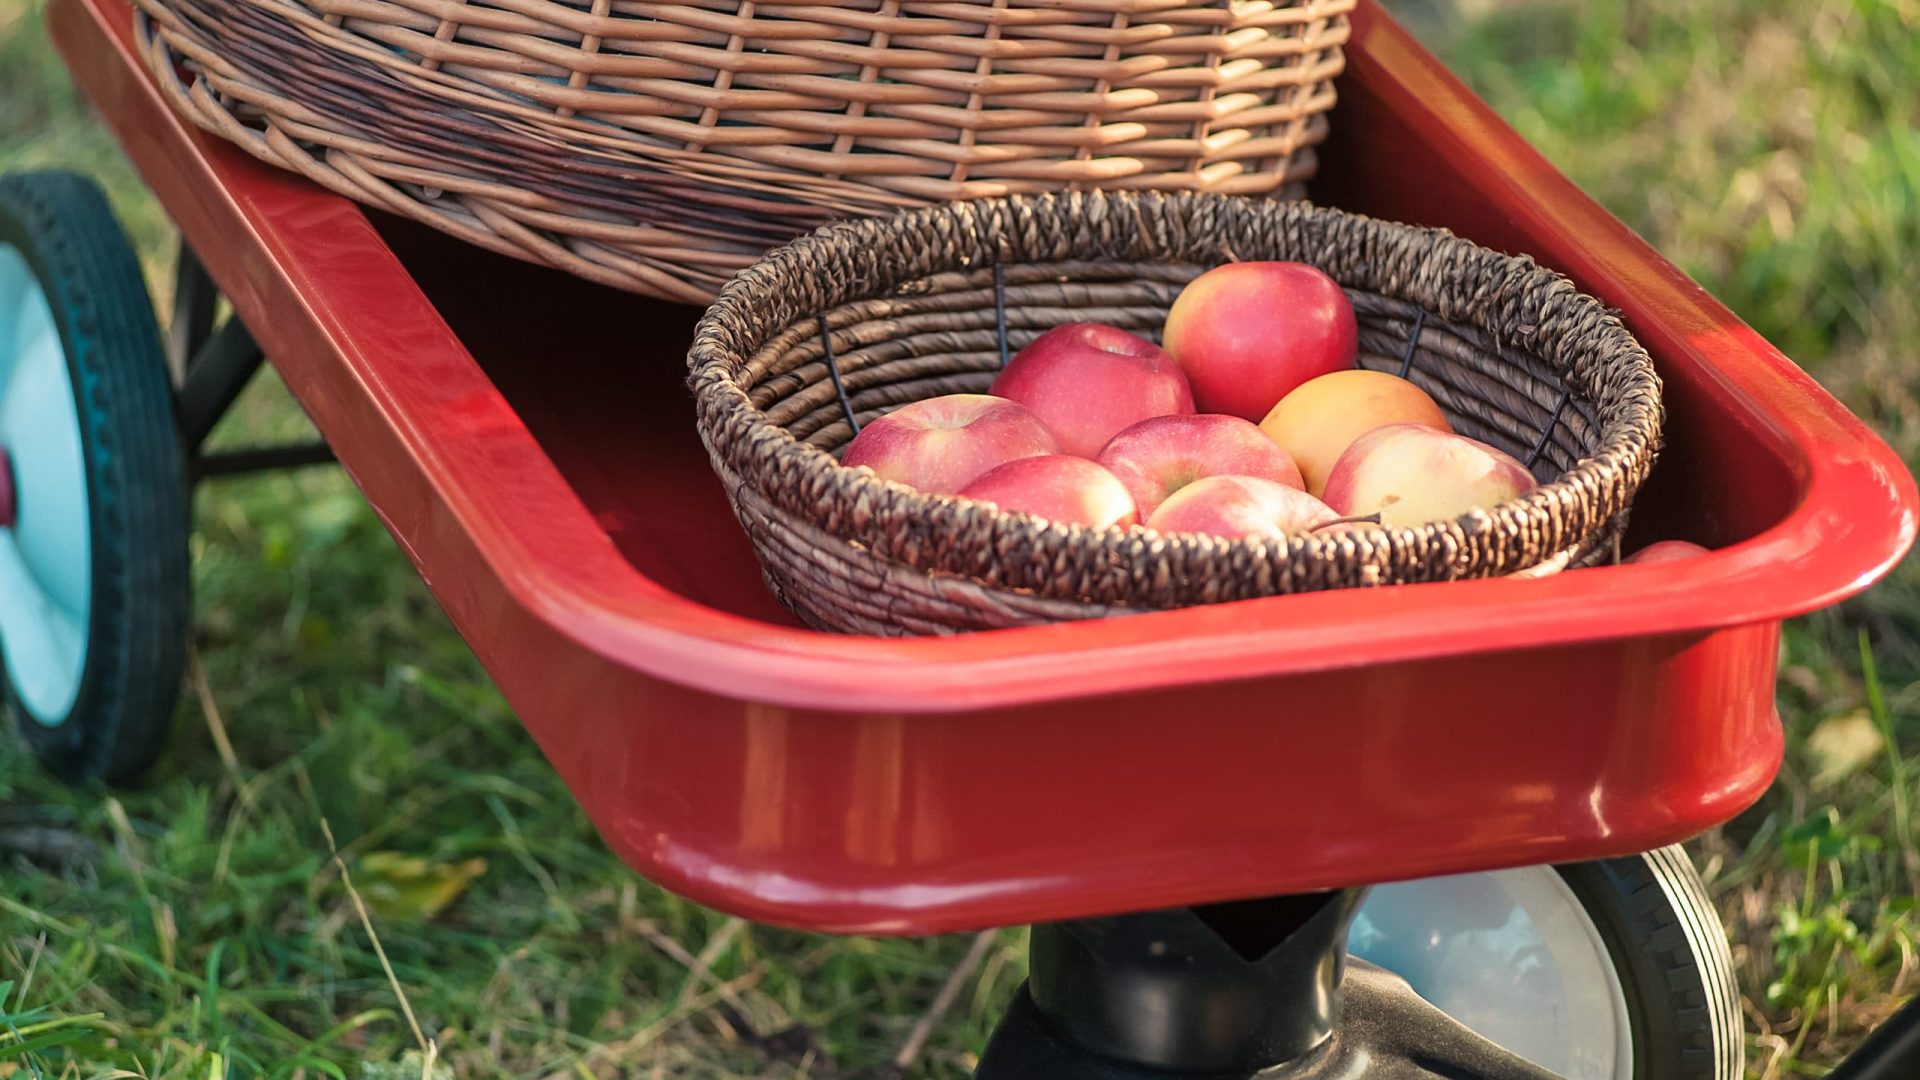 Apple harvest. Ripe red apples in the basket and in dark wooden crate in red wagon on the green grass. Copy space